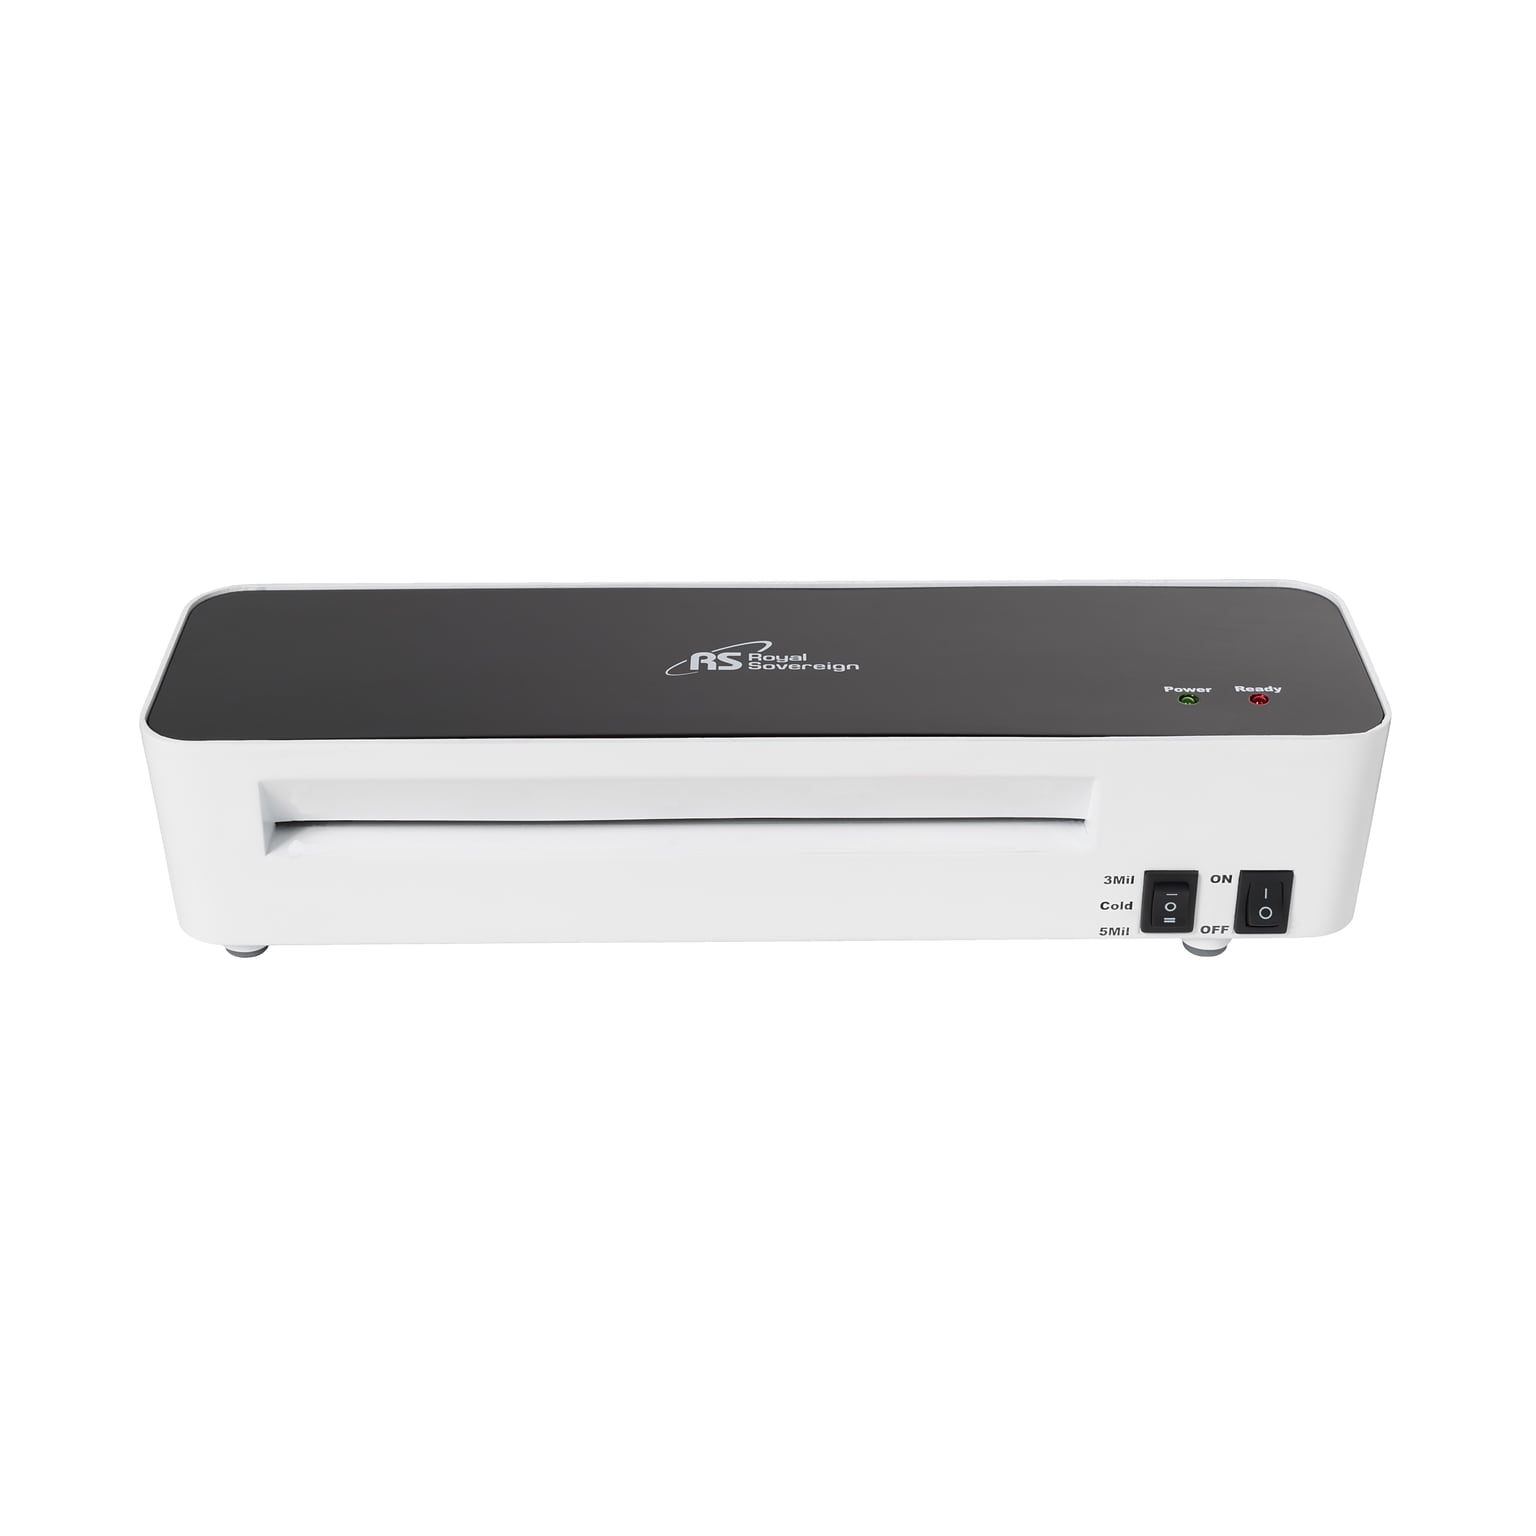 Royal Soverign 9 2 Roller Glass-Top Pouch Laminator (IL-926W)